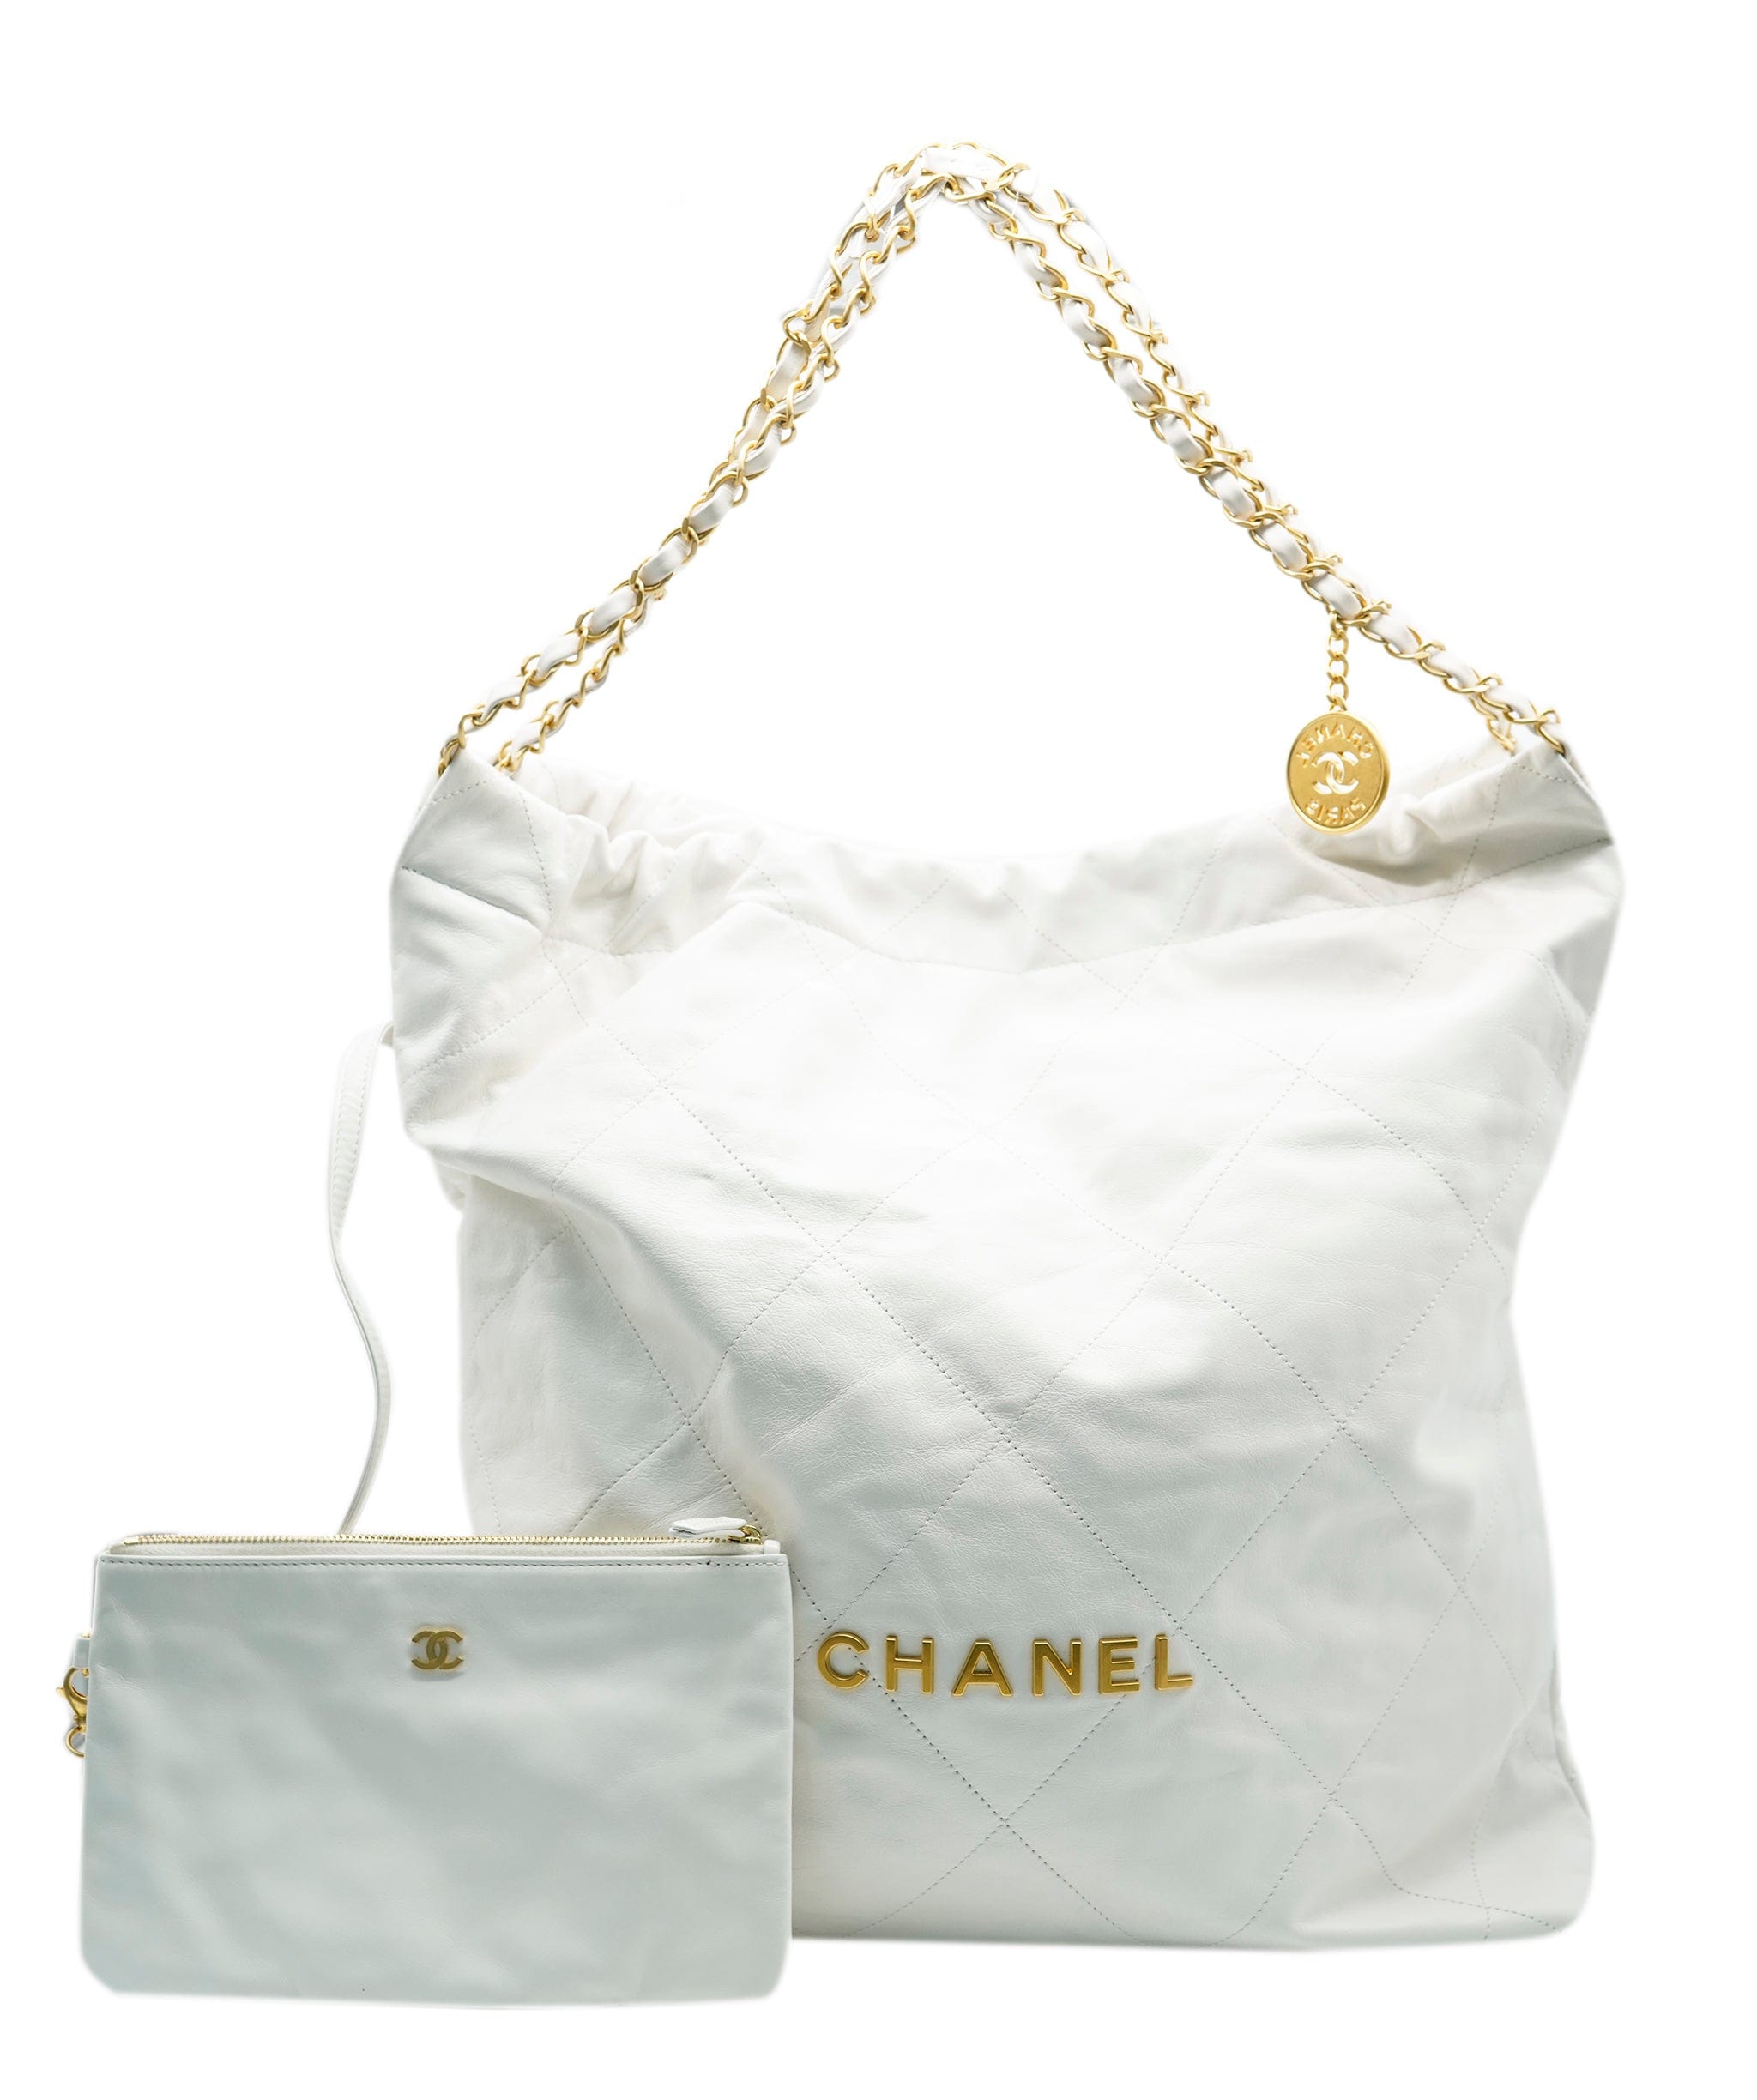 Chanel 22 bag white leather AVC1434 – LuxuryPromise